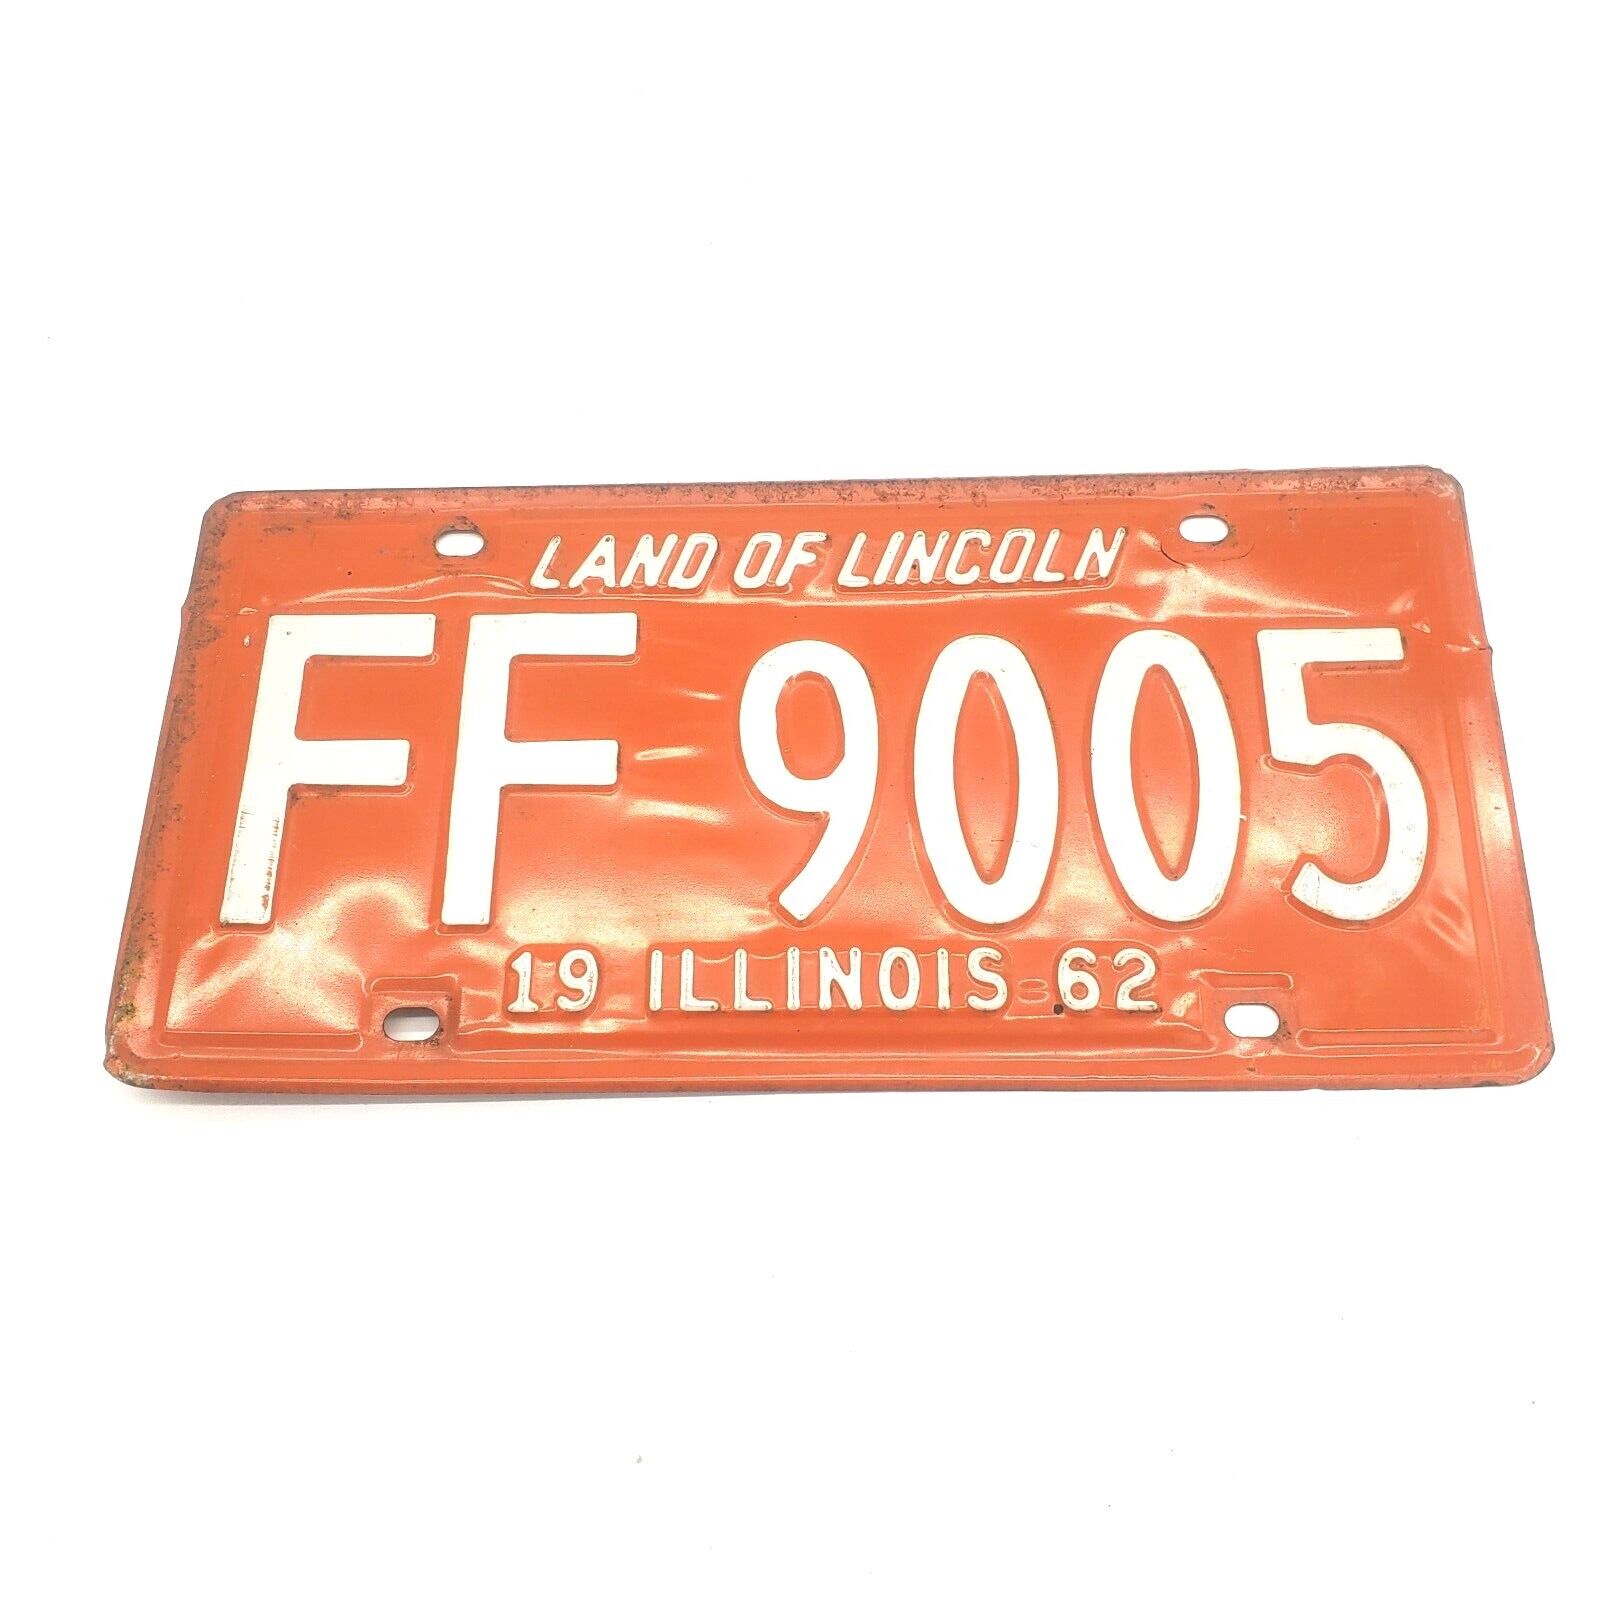 Vintage illinois license plate 1962 land of Lincoln plate FF9005